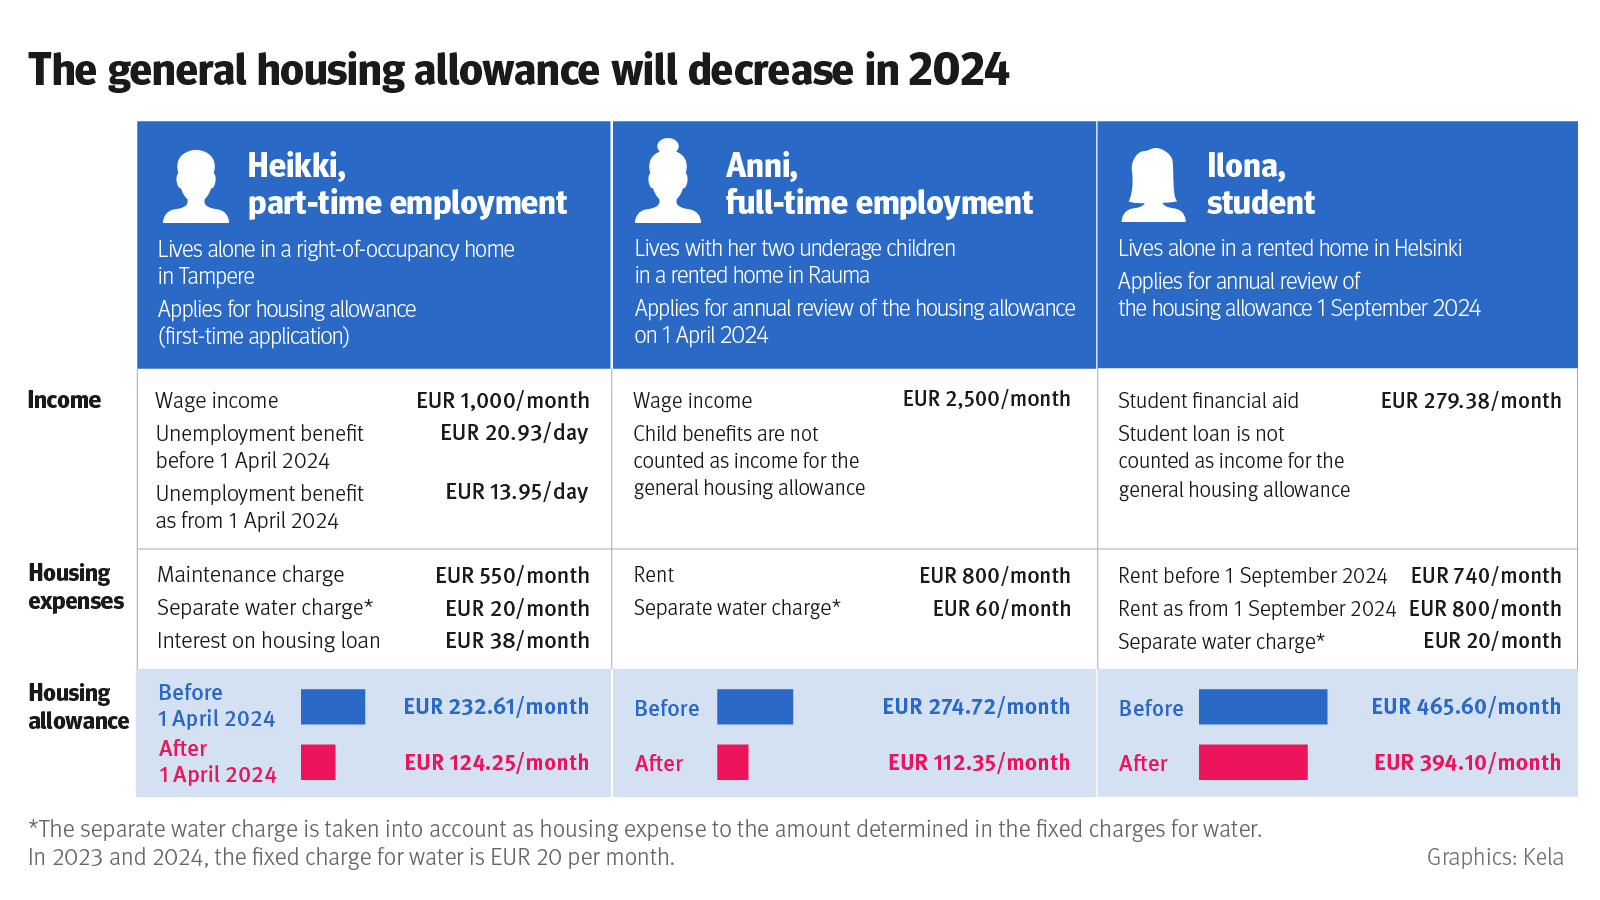 The image shows how the forthcoming changes to the general housing allowance will affect the general housing allowances received by the three persons in the example. The data for the image are shown in a table below the image.